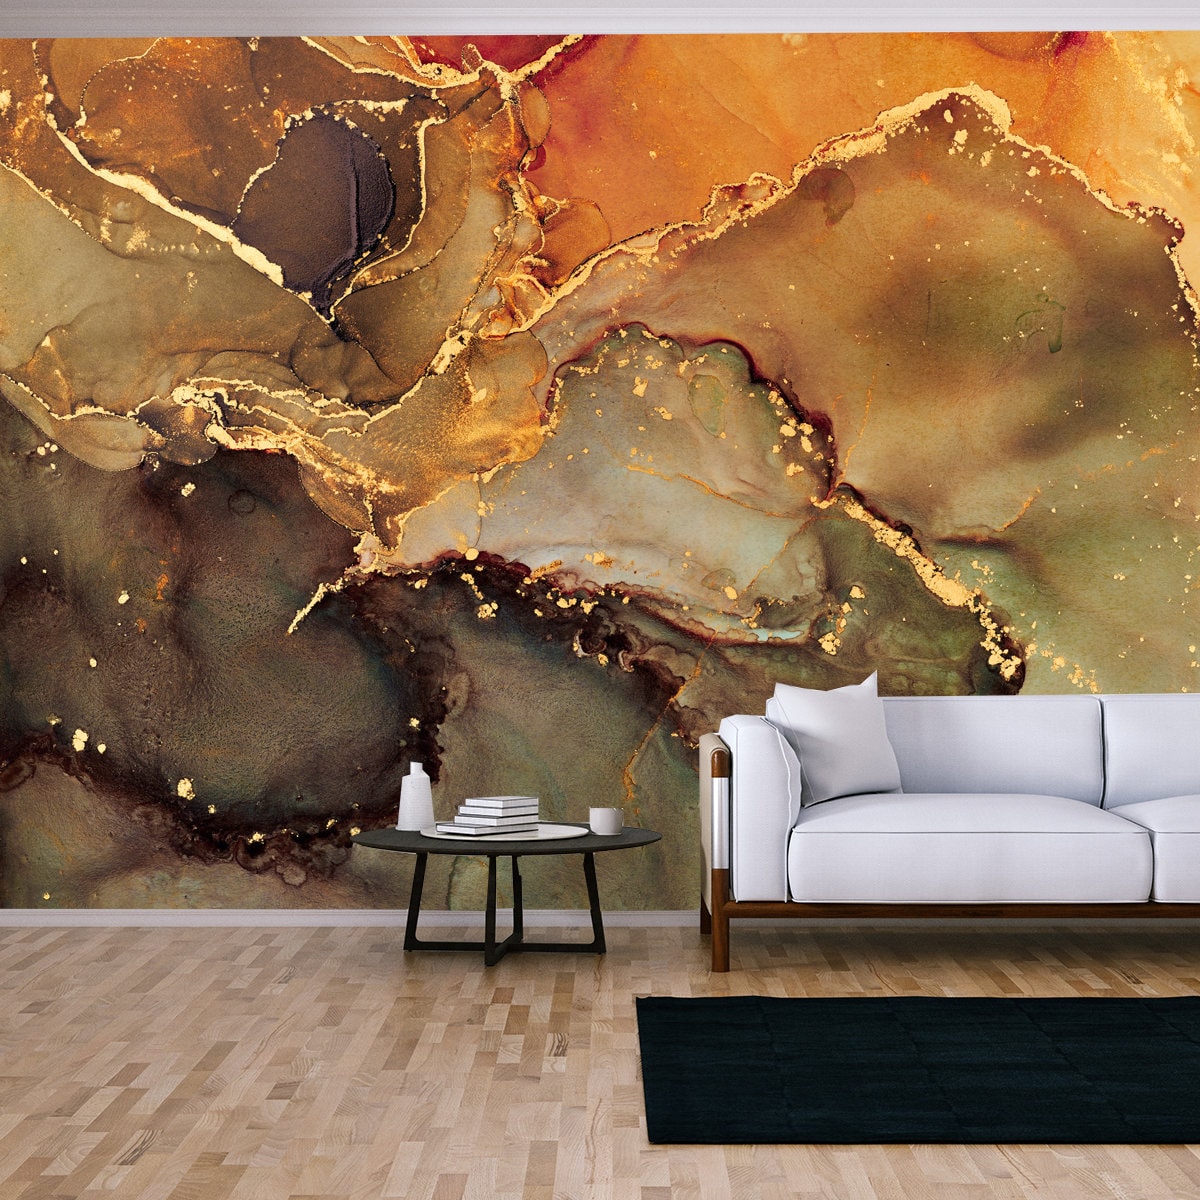 Alcohol Ink Art. Mixing Liquid Paints. Modern, Abstract Colorful Background, Wallpaper Living Room Mural